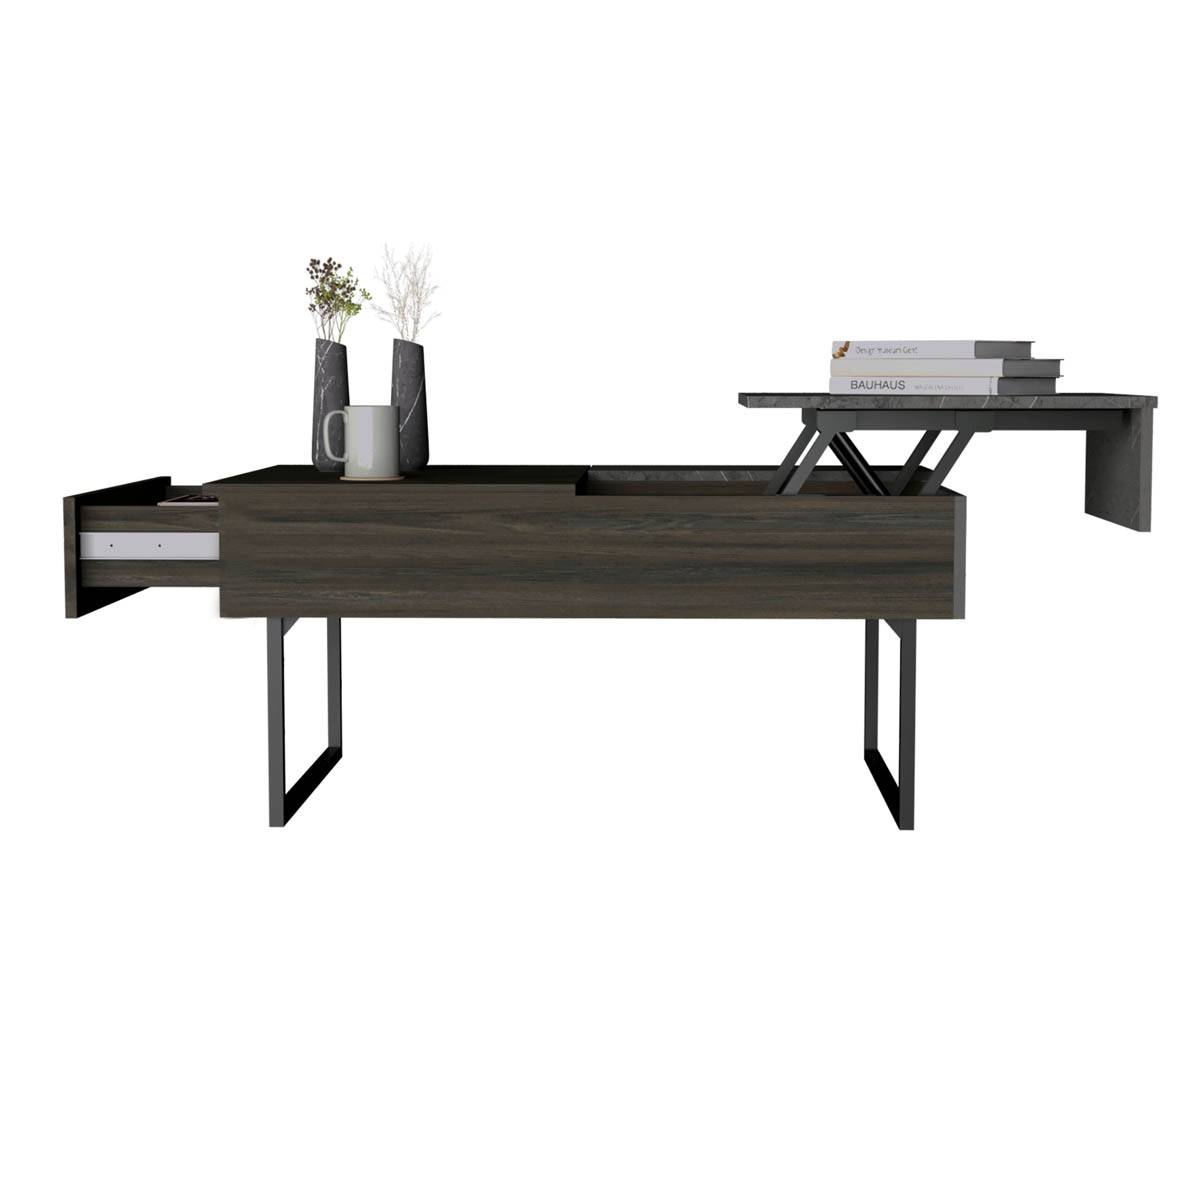 FM FURNITURE Georgetown Lift Onyx Top Coffee Table